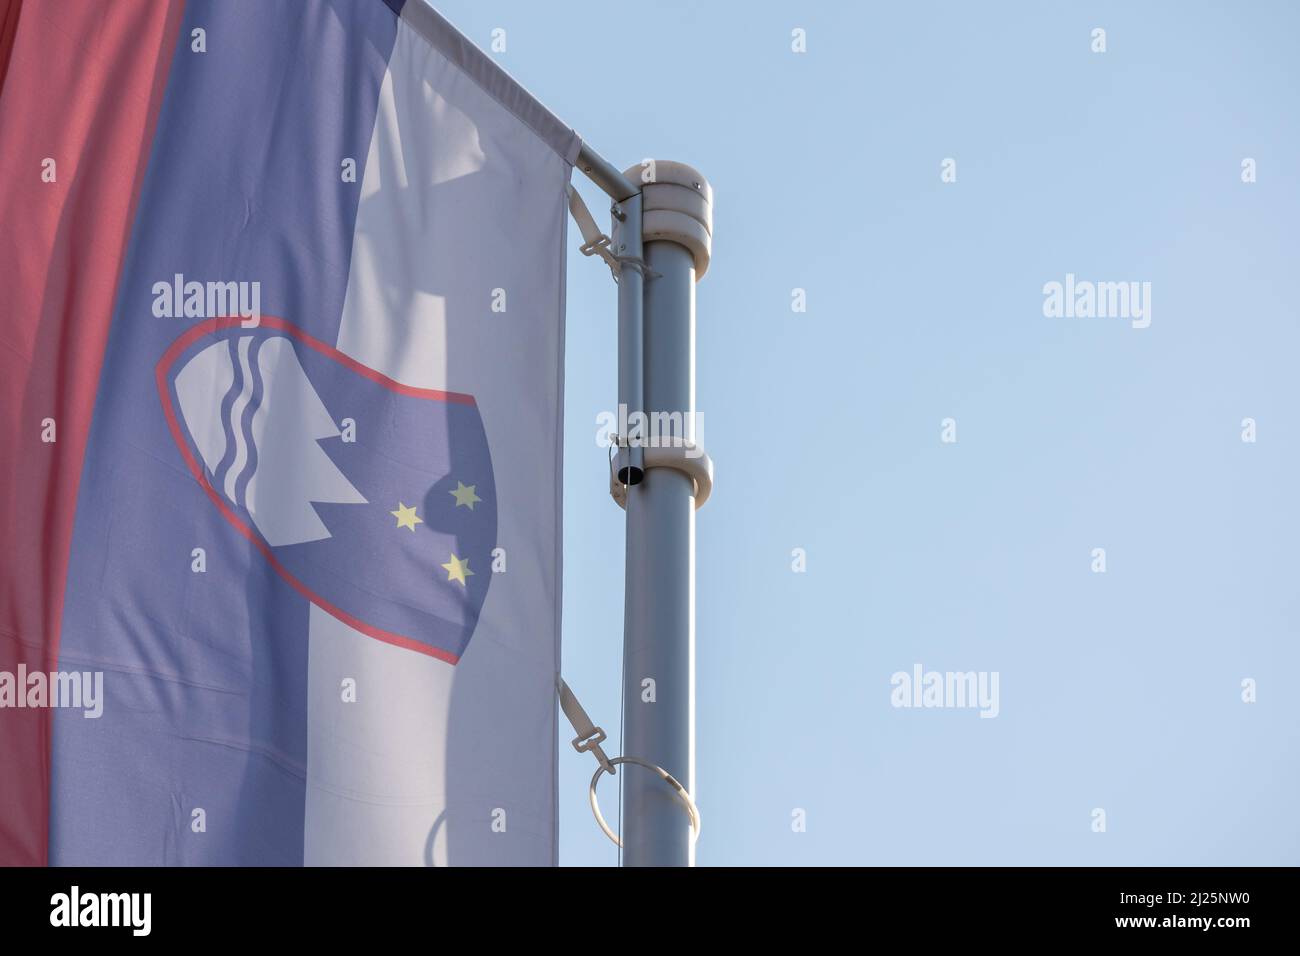 Slovenia national flag waving in the wind. Stock Photo